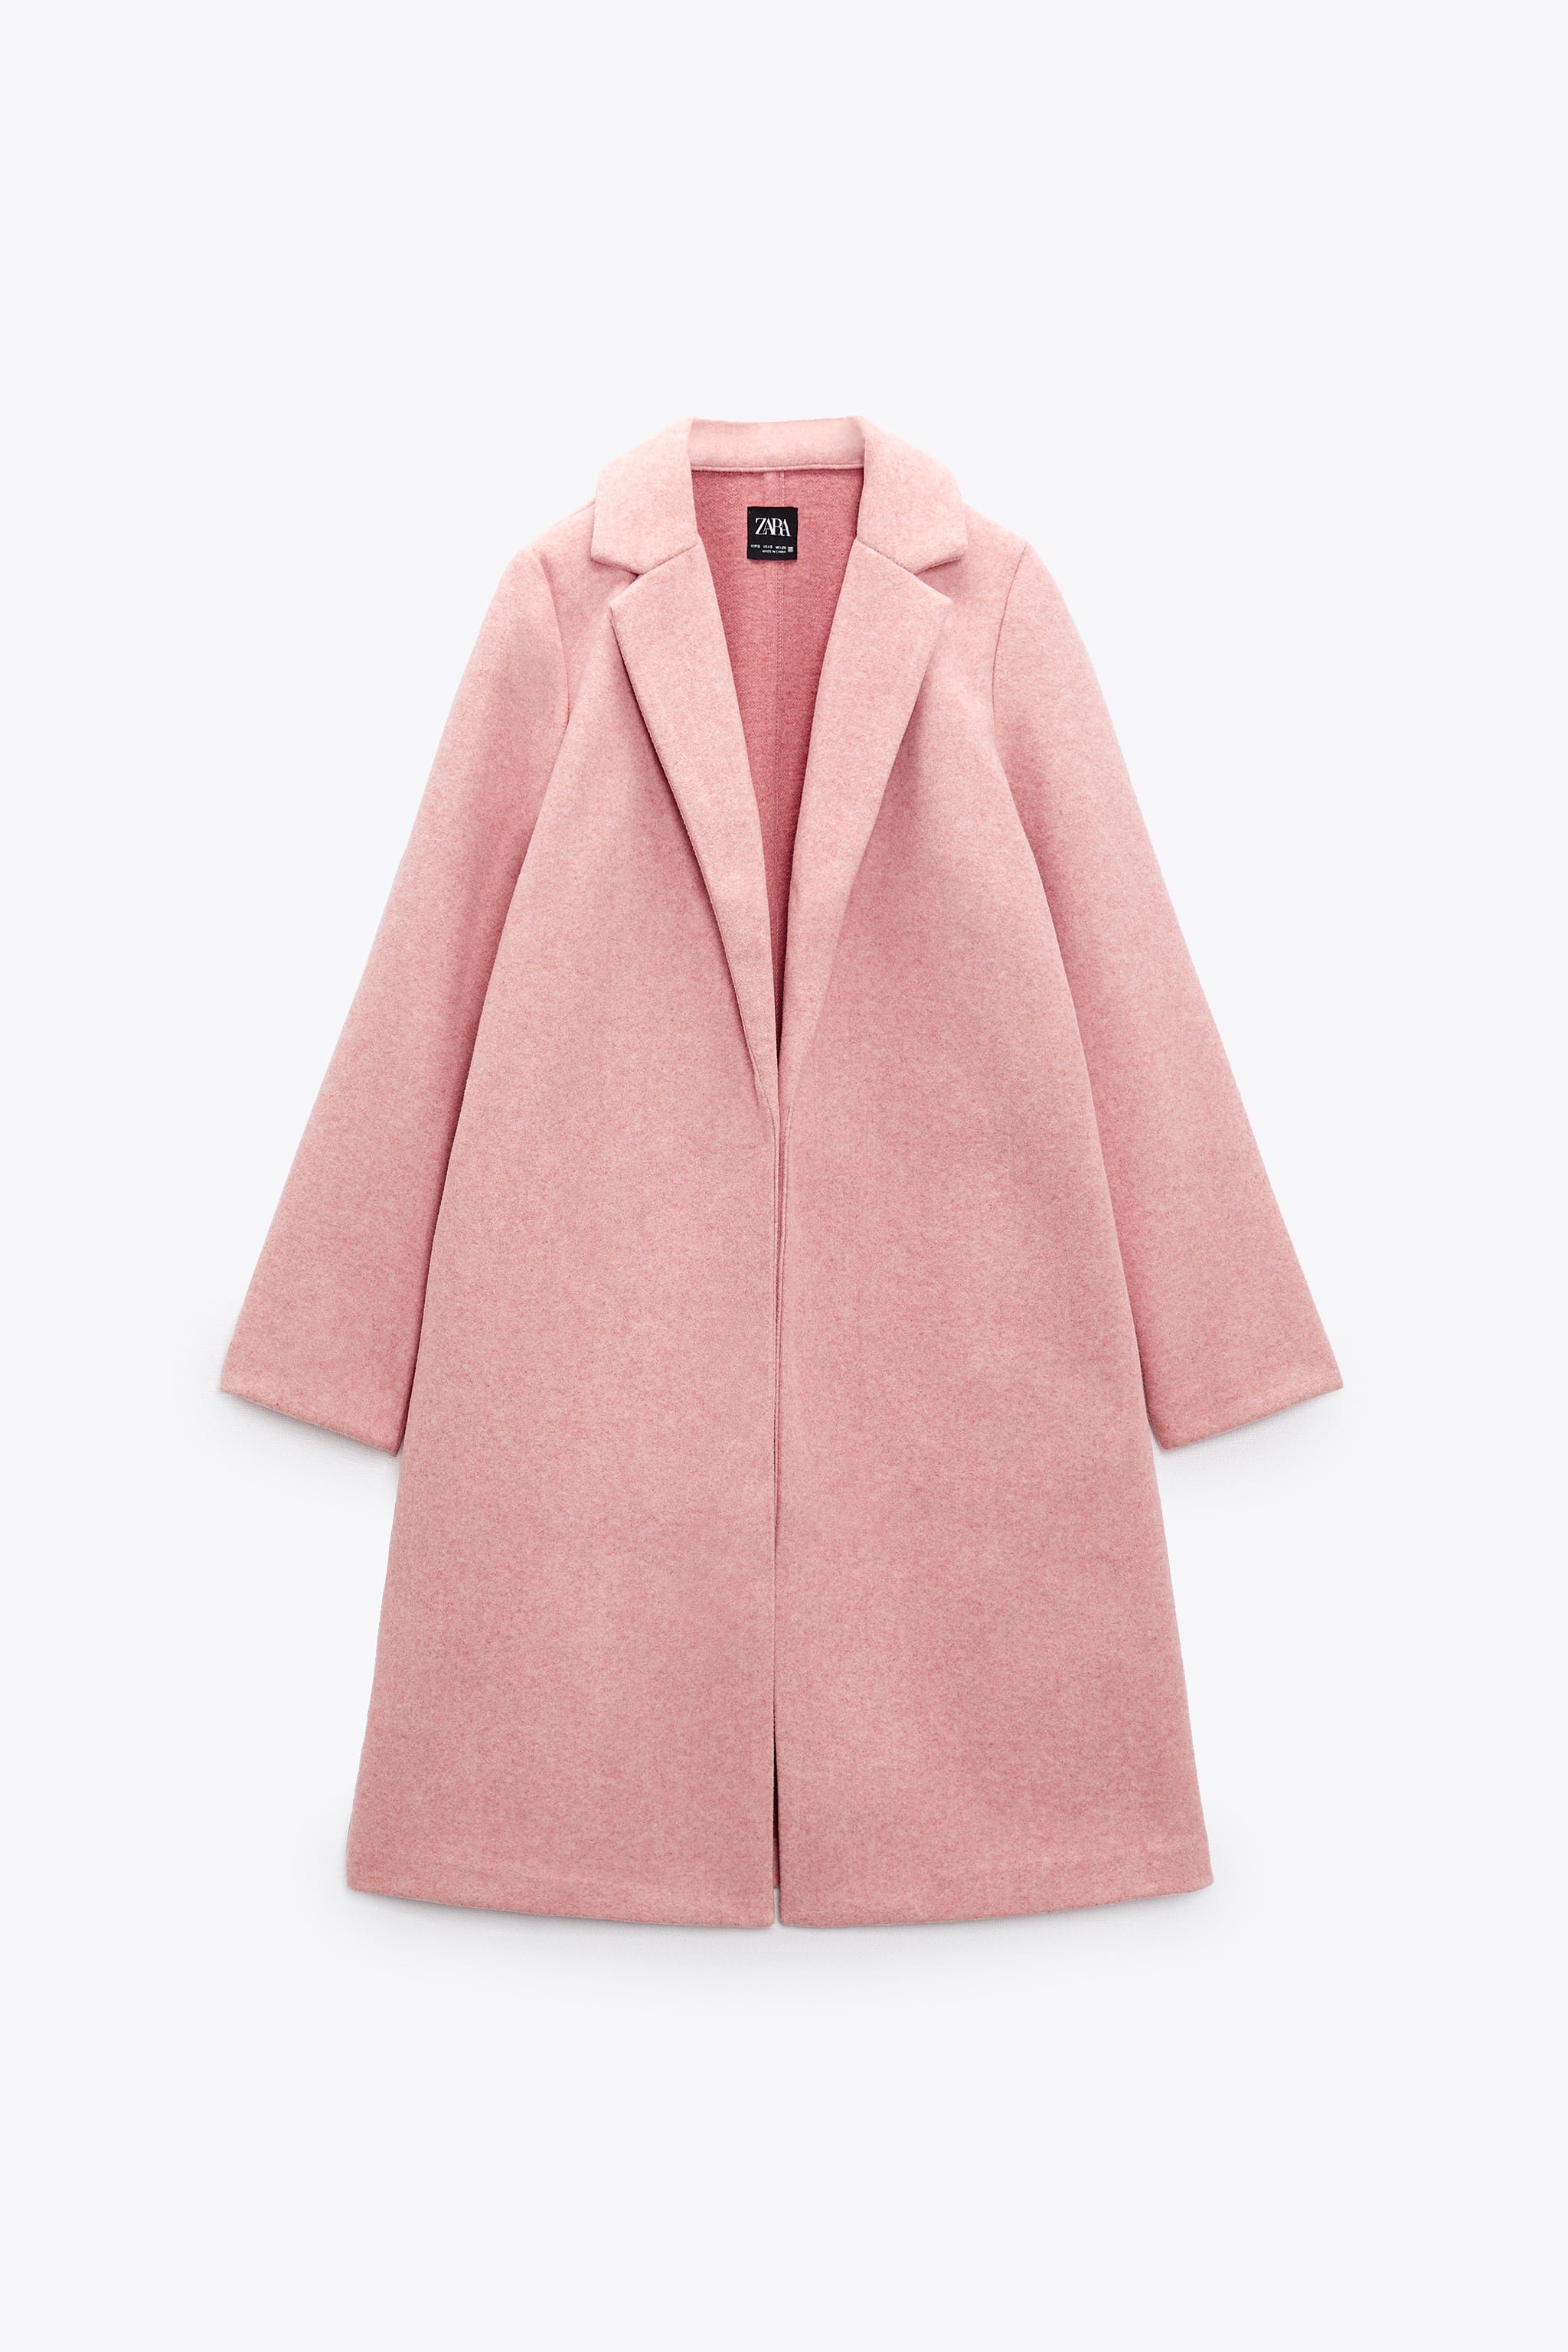 Zara Synthetic Wool Coat in Pink — UFO No More